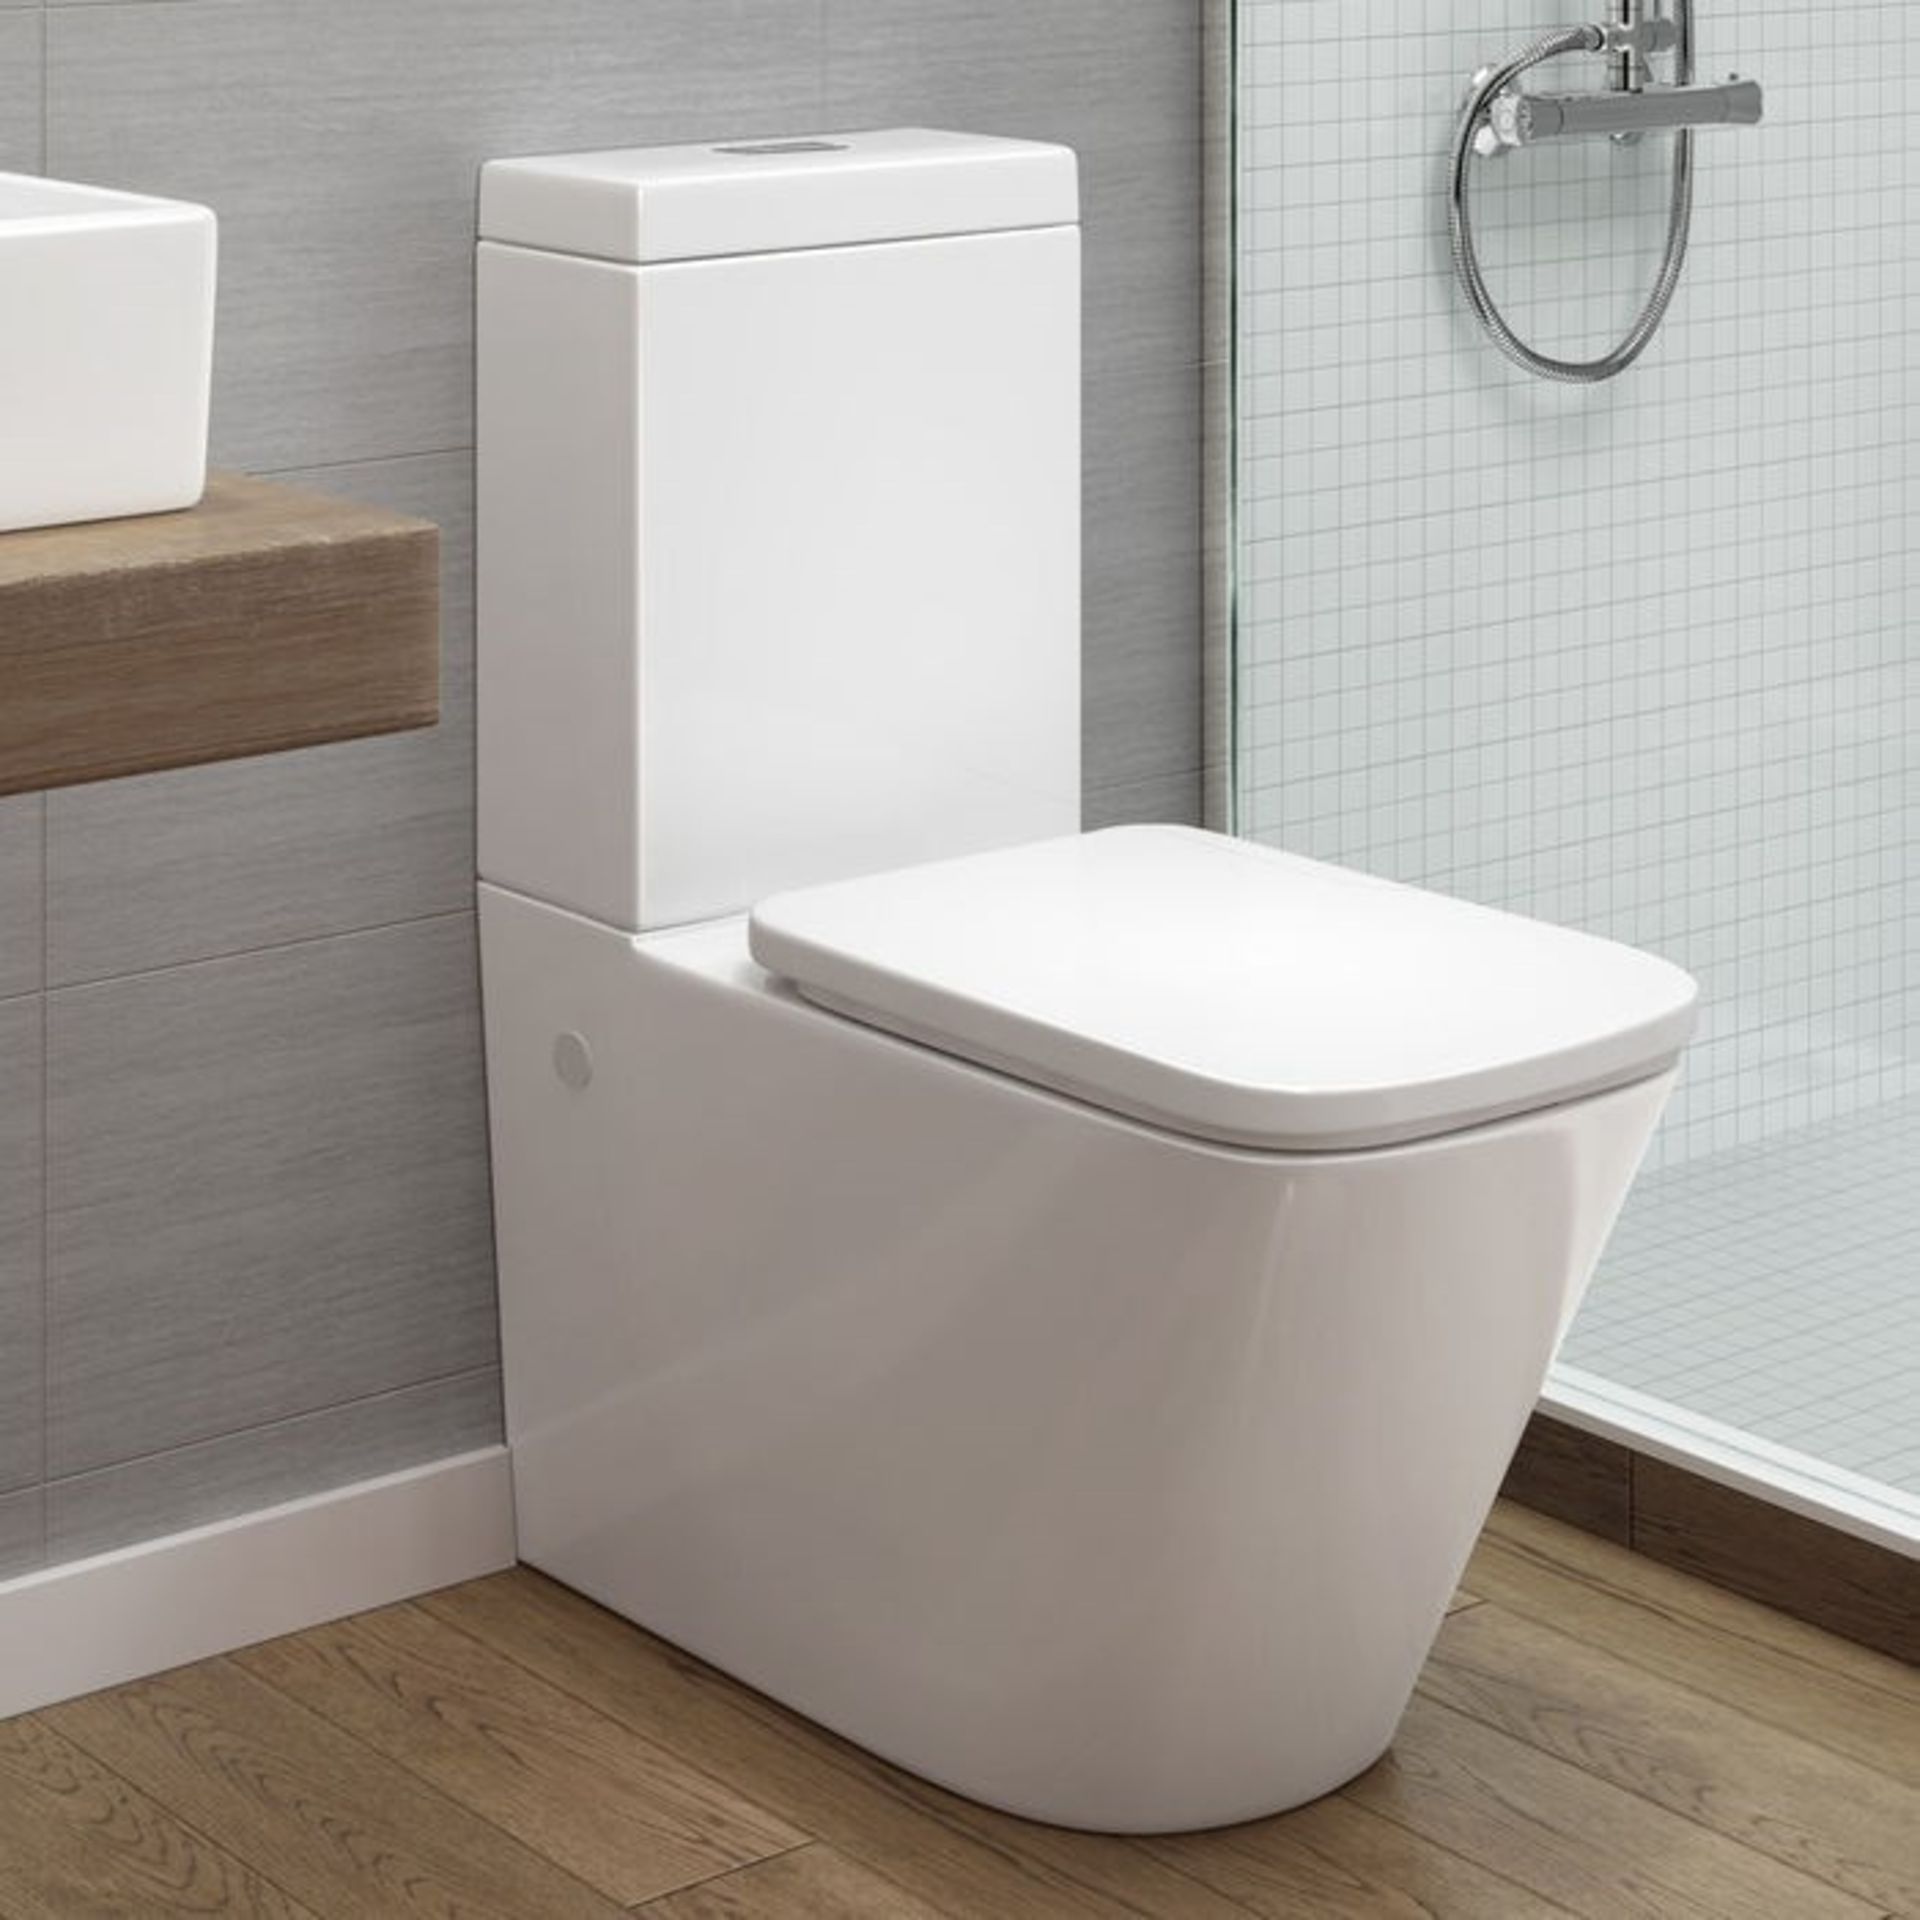 NEW & BOXED Florence Close Coupled Toilet & Cistern inc Soft Close Seat. Contemporary design f... - Image 3 of 3